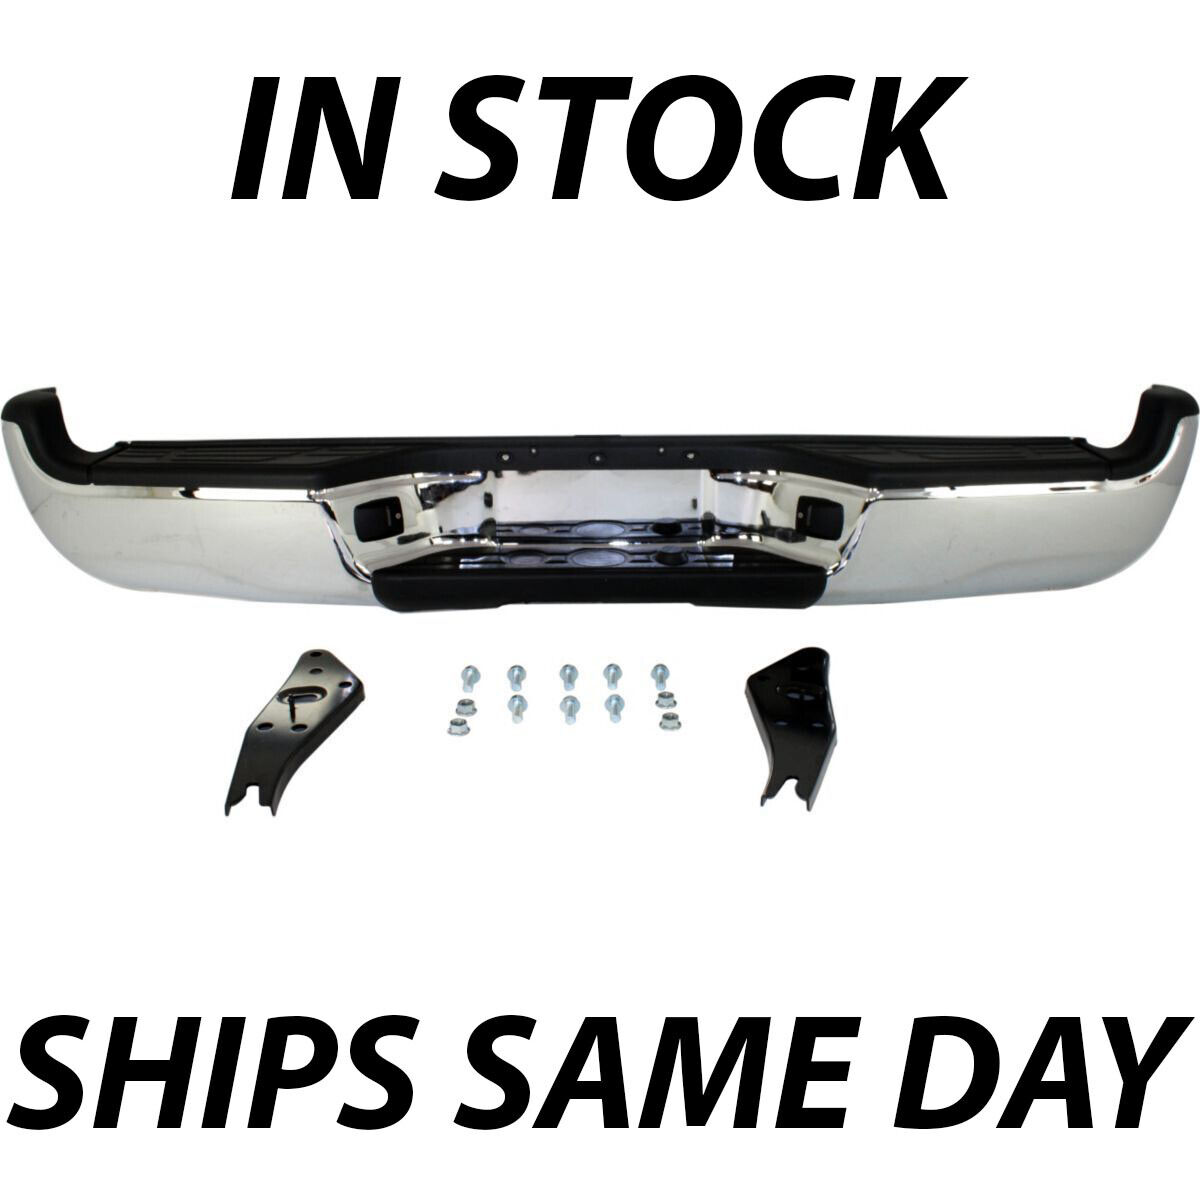 NEW Steel - Complete Chrome Rear Bumper Assembly for 2005-2015 Tacoma 05-15 SR5